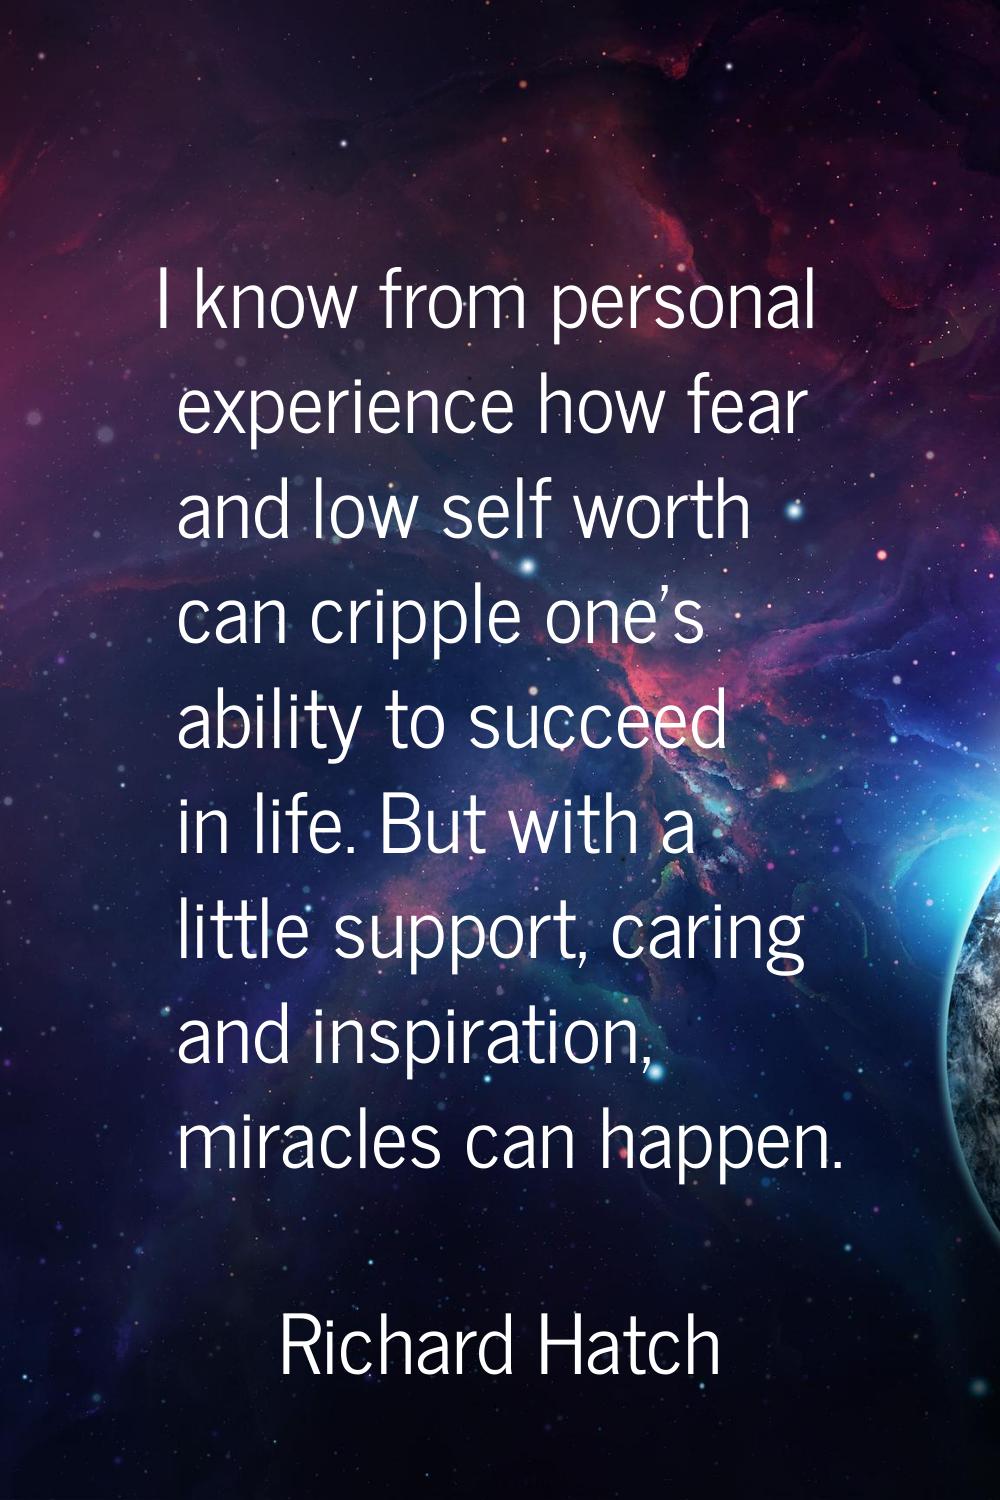 I know from personal experience how fear and low self worth can cripple one's ability to succeed in